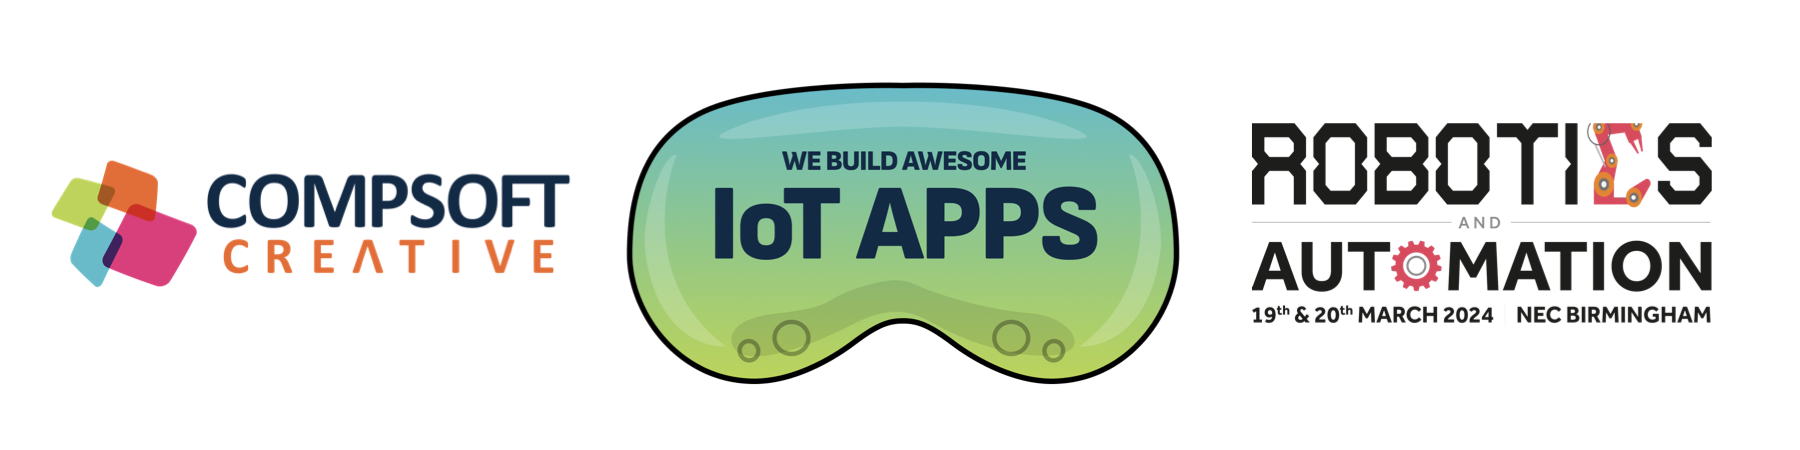 Compsoft Creative Logo and Apple Vision Pro Illustration with the words "We build awesome IoT Apps" and Robotics and Automation 2024 event logo